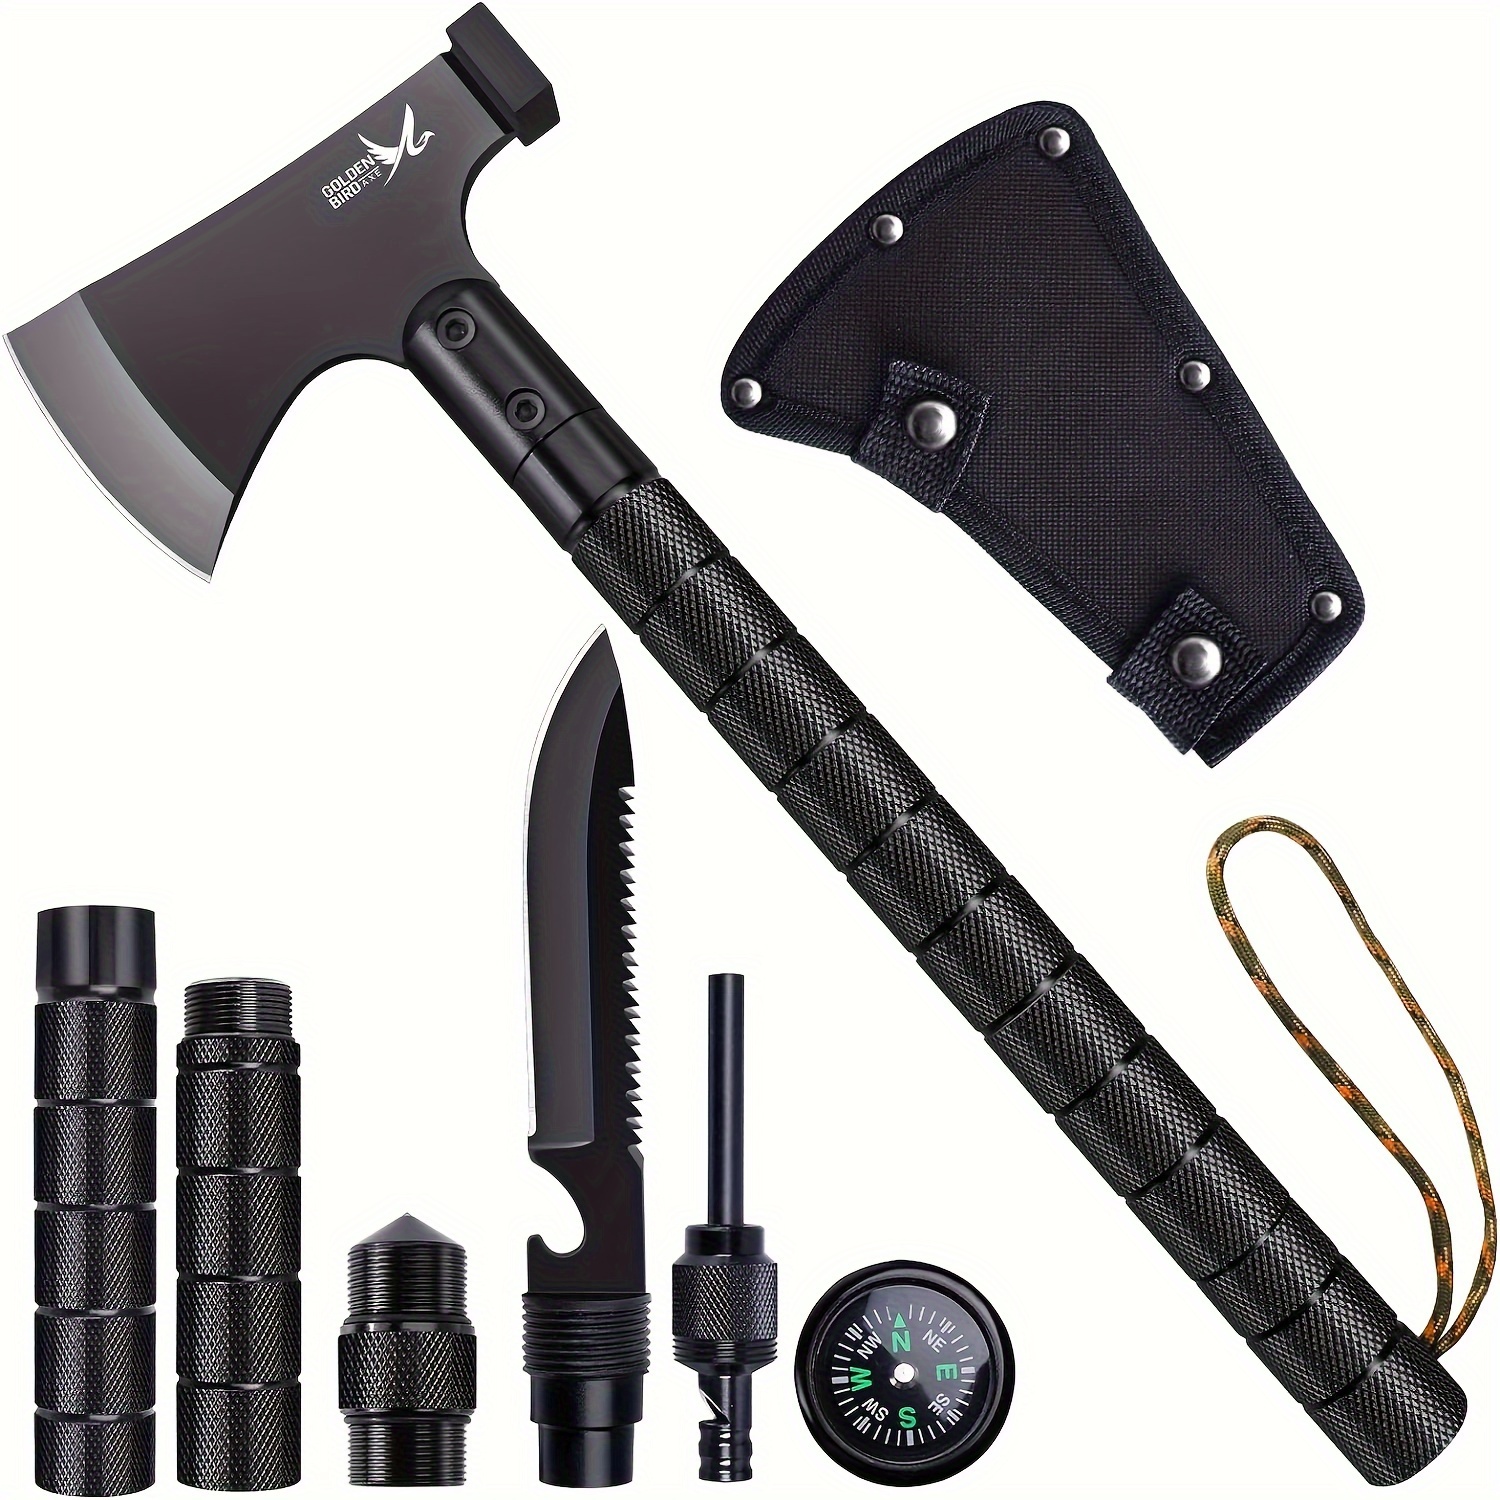 

Axe Survival 9 In 1, Camping Large, Multitool With Hammer Sheath Whistle, Sharp Outdoor Camping Hatchet Bushcraft, Cool Black Set